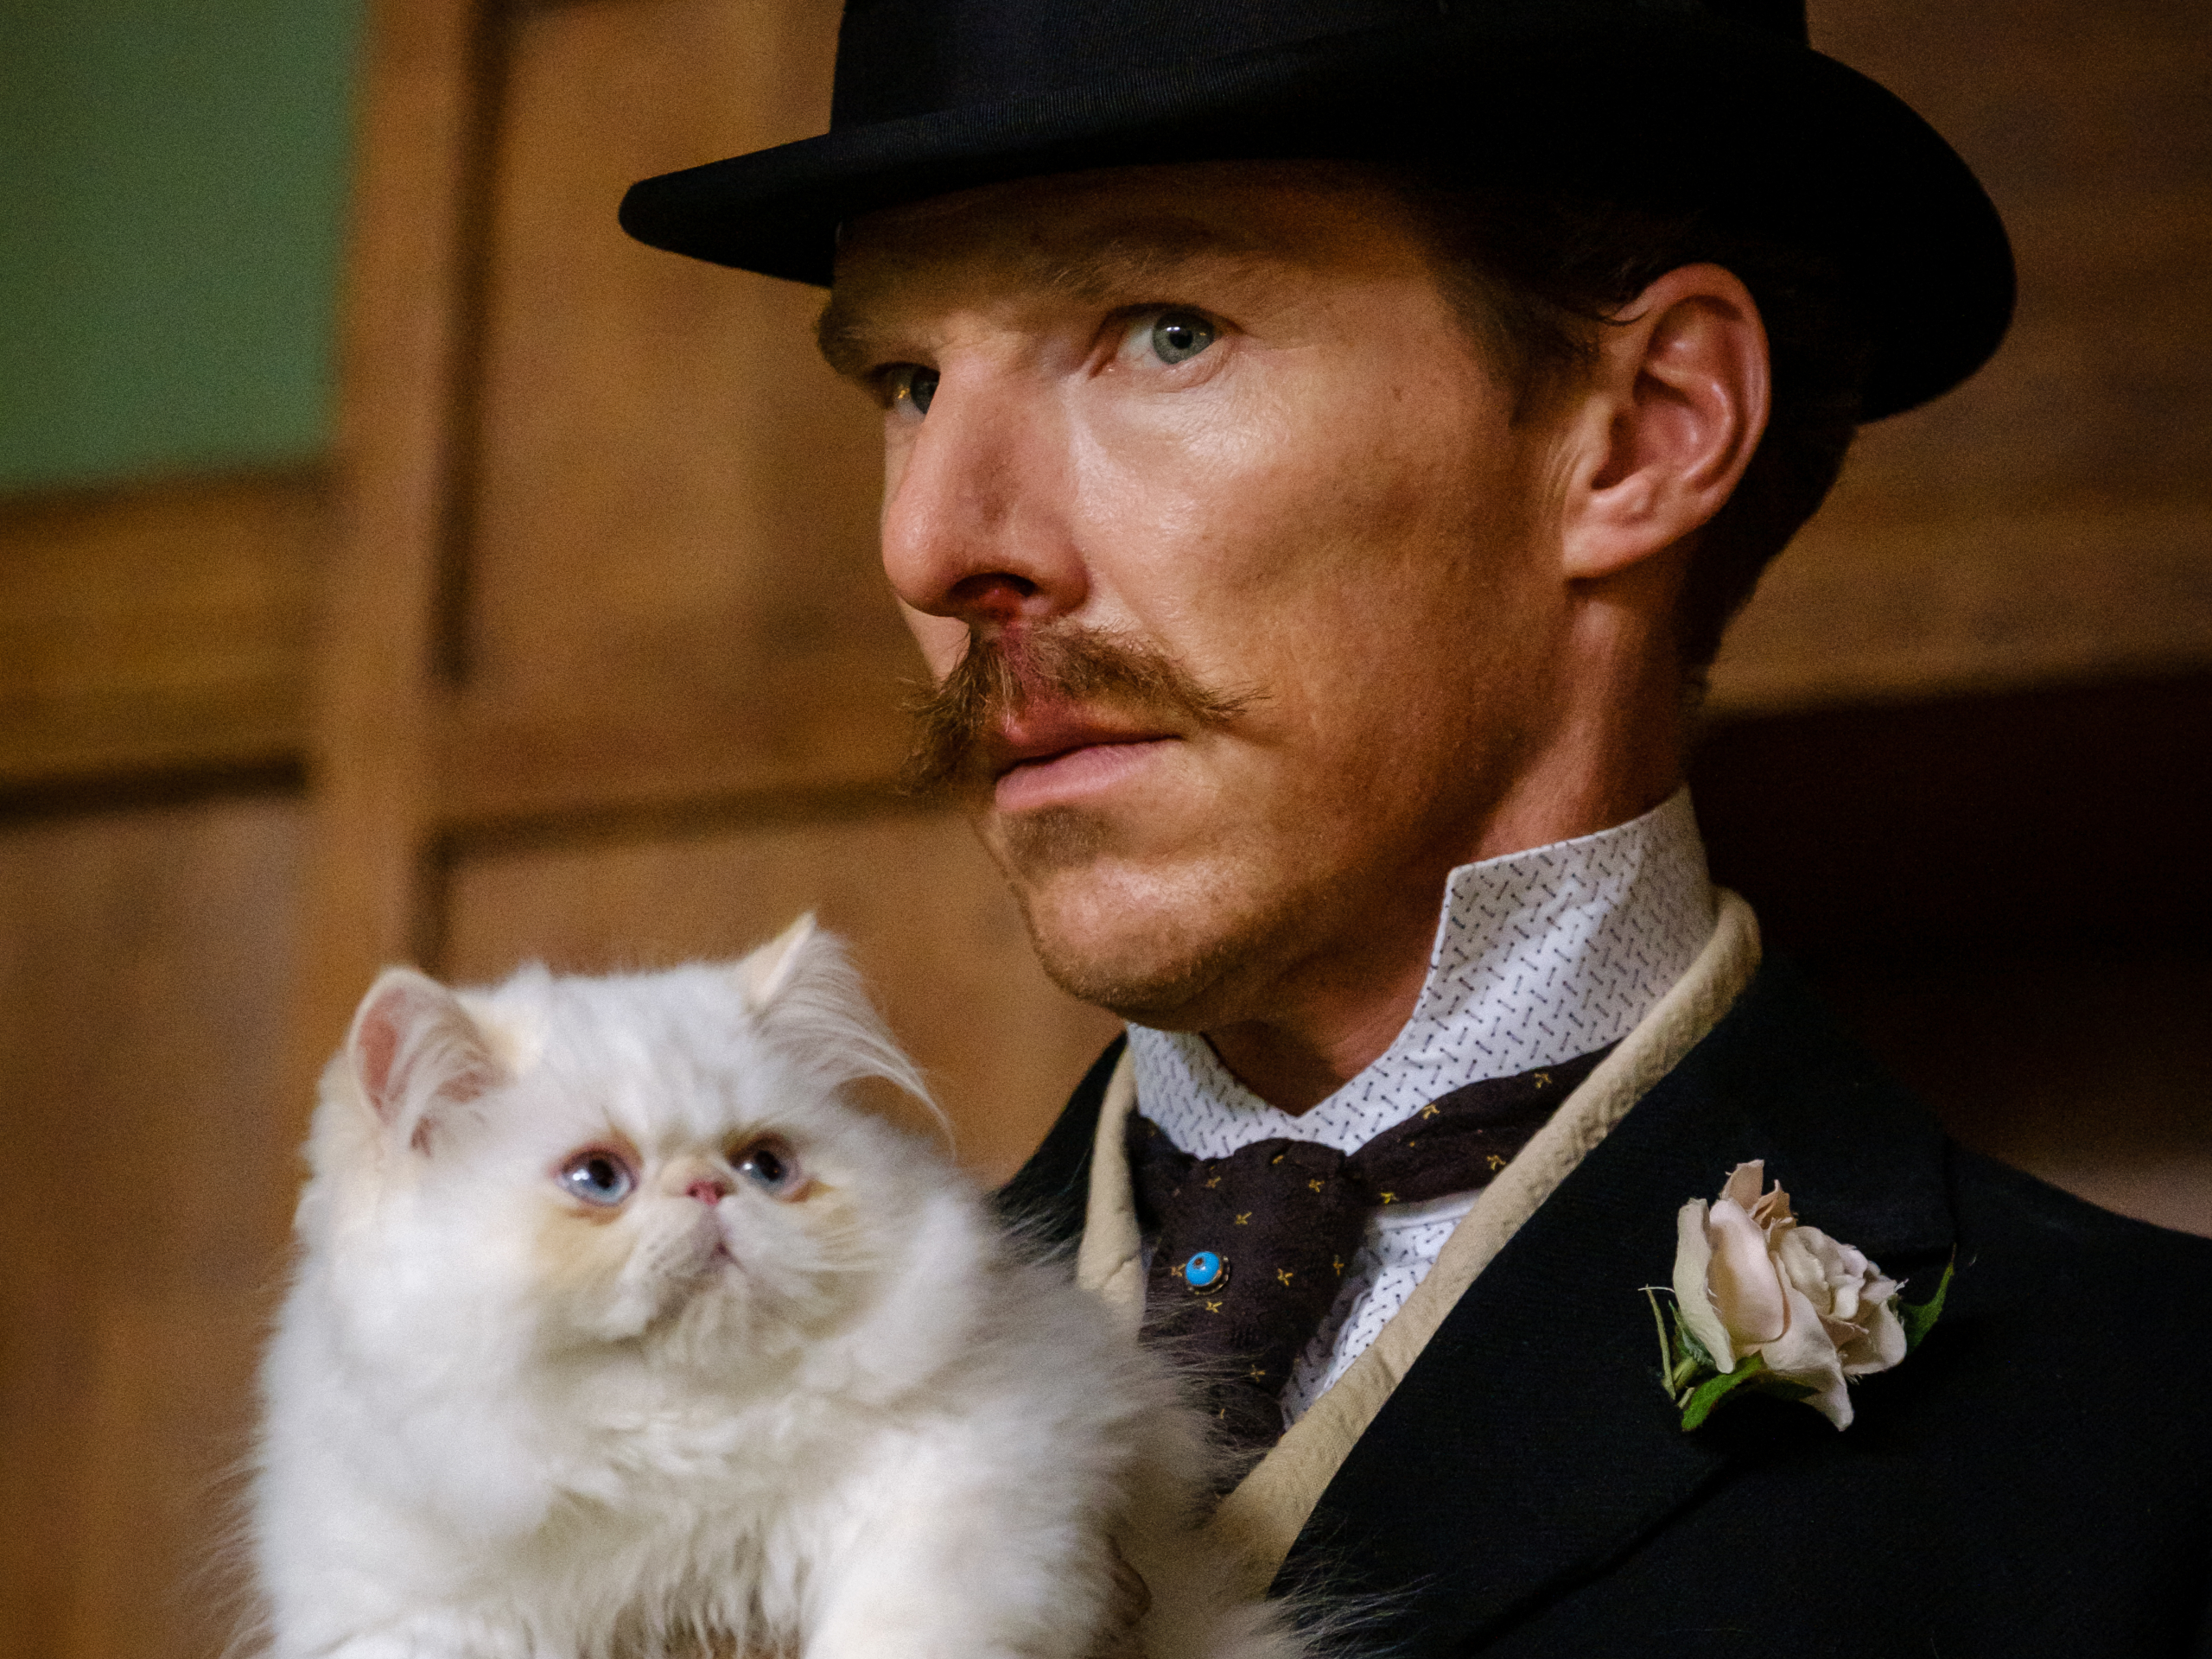 movie, the electrical life of louis wain, benedict cumberbatch